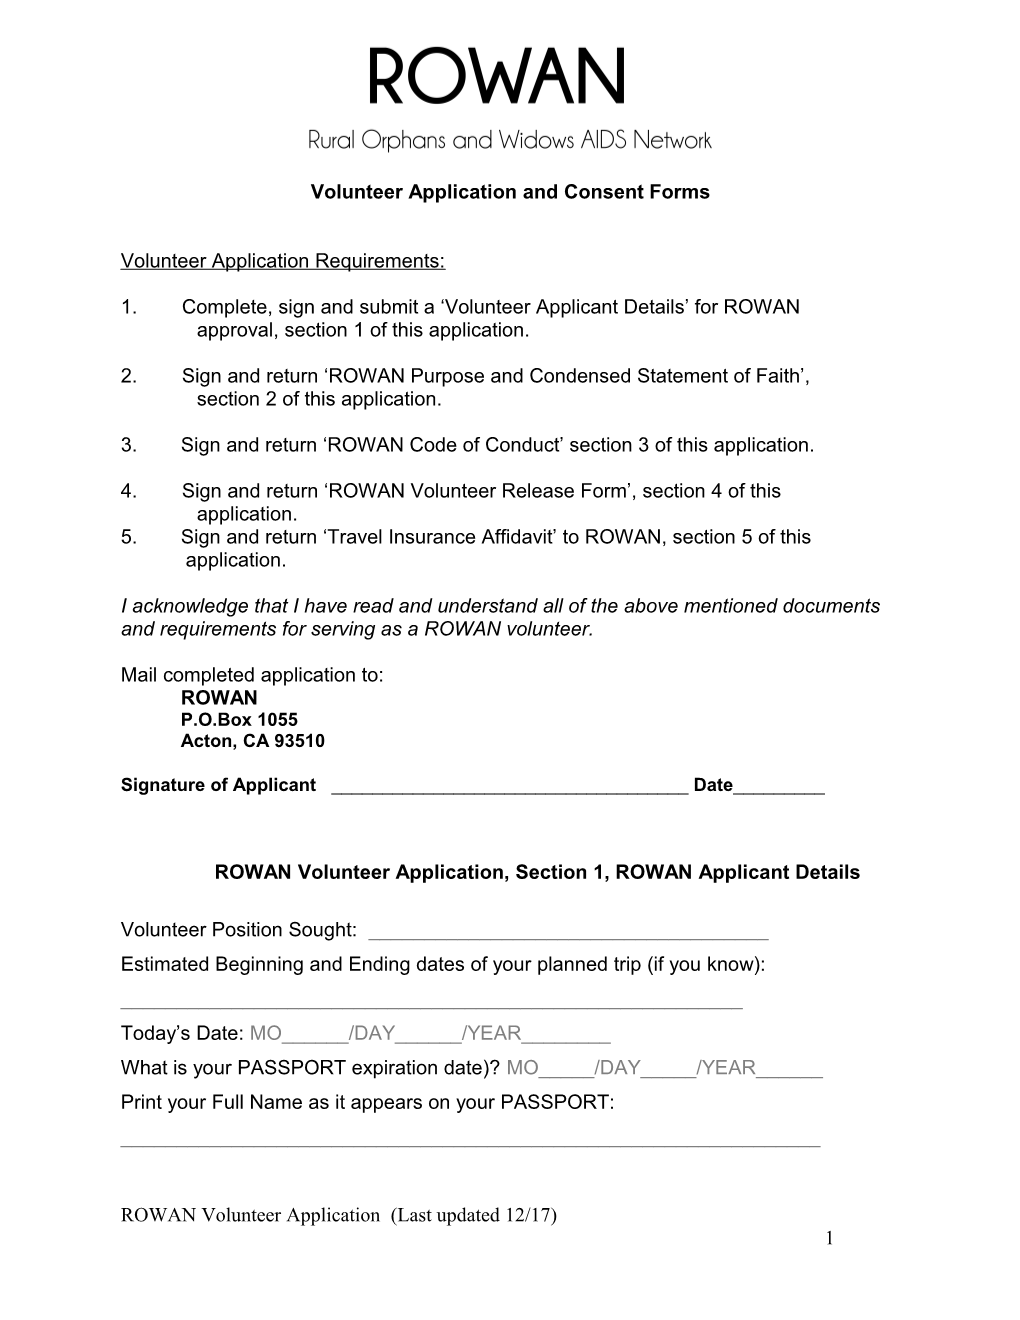 Volunteer Application and Consent Forms